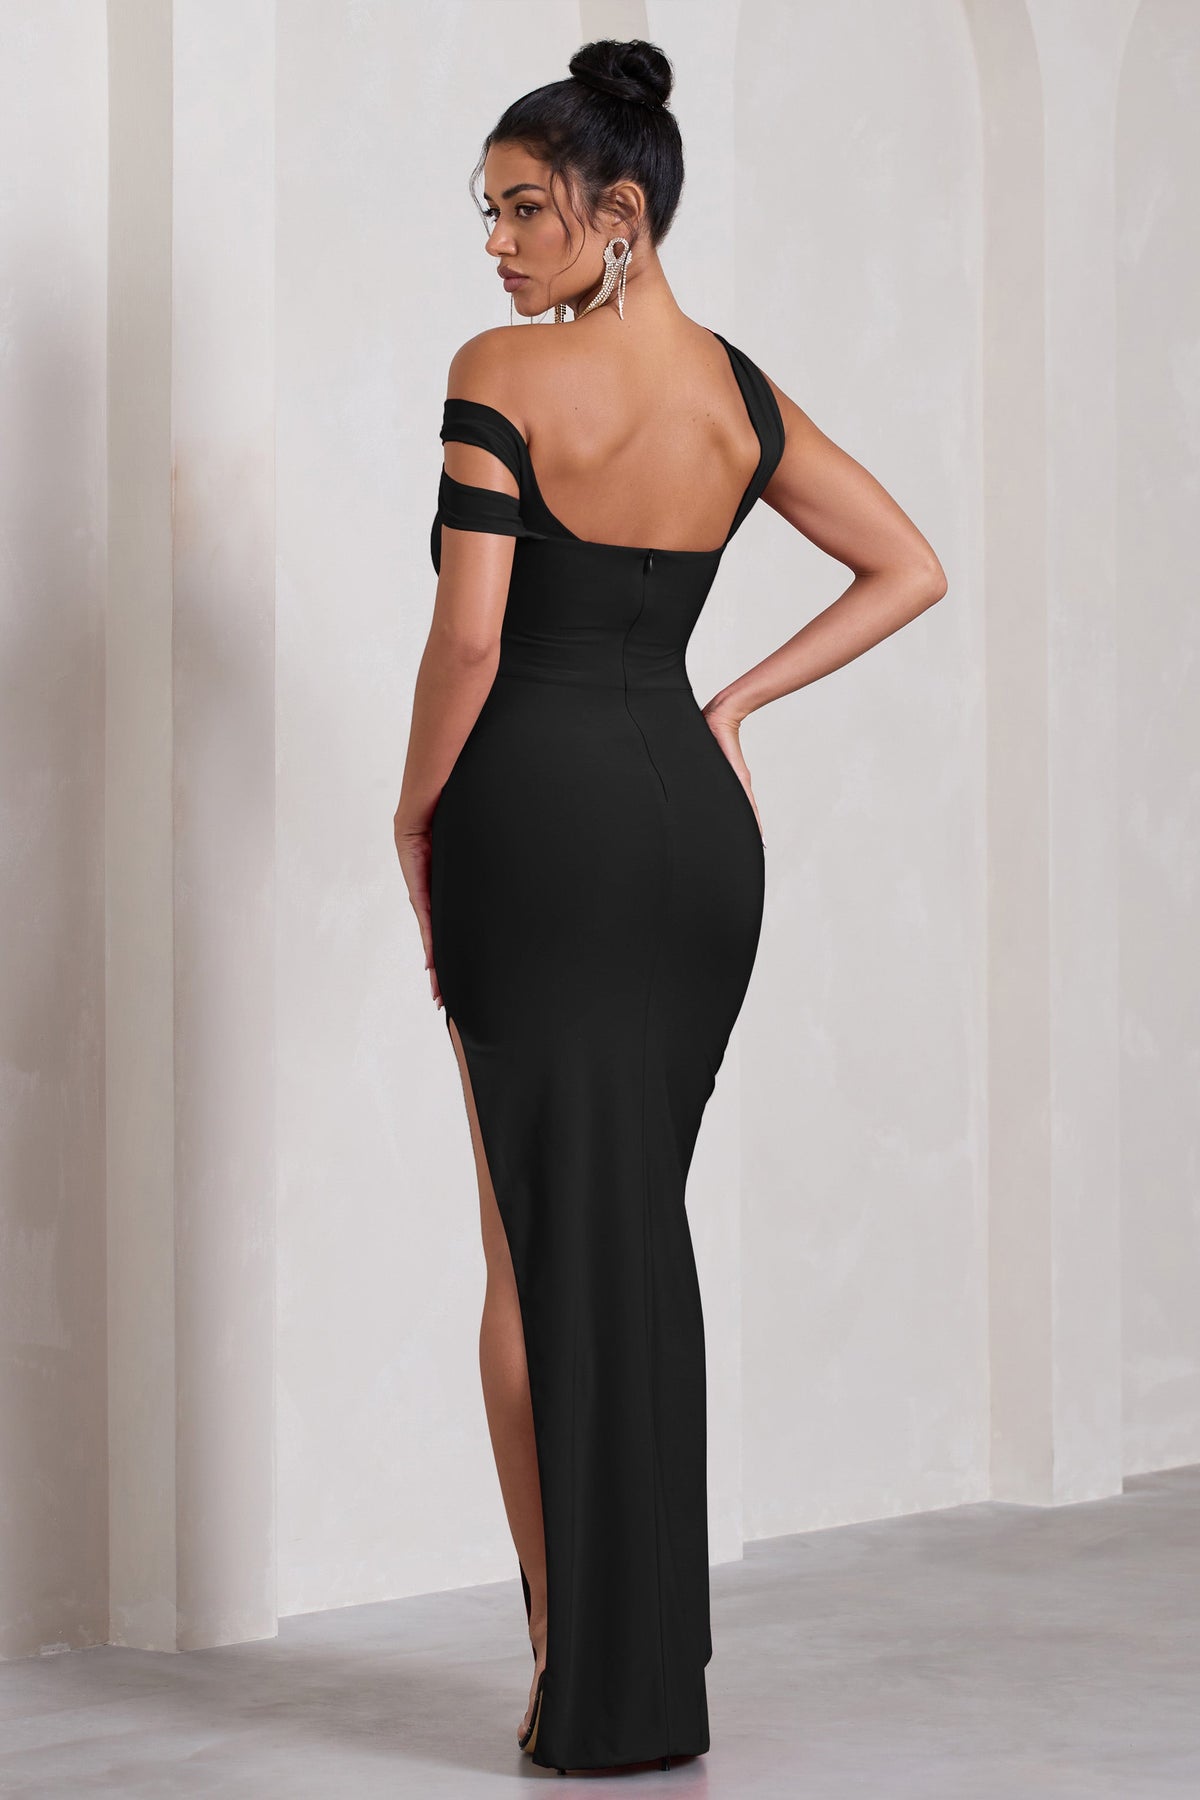 Shop/Clothing/Dresses/Shop celebrity and runway inspired dresses for less |  Satin maxi dress, Max dress, Bodycon maxi dresses